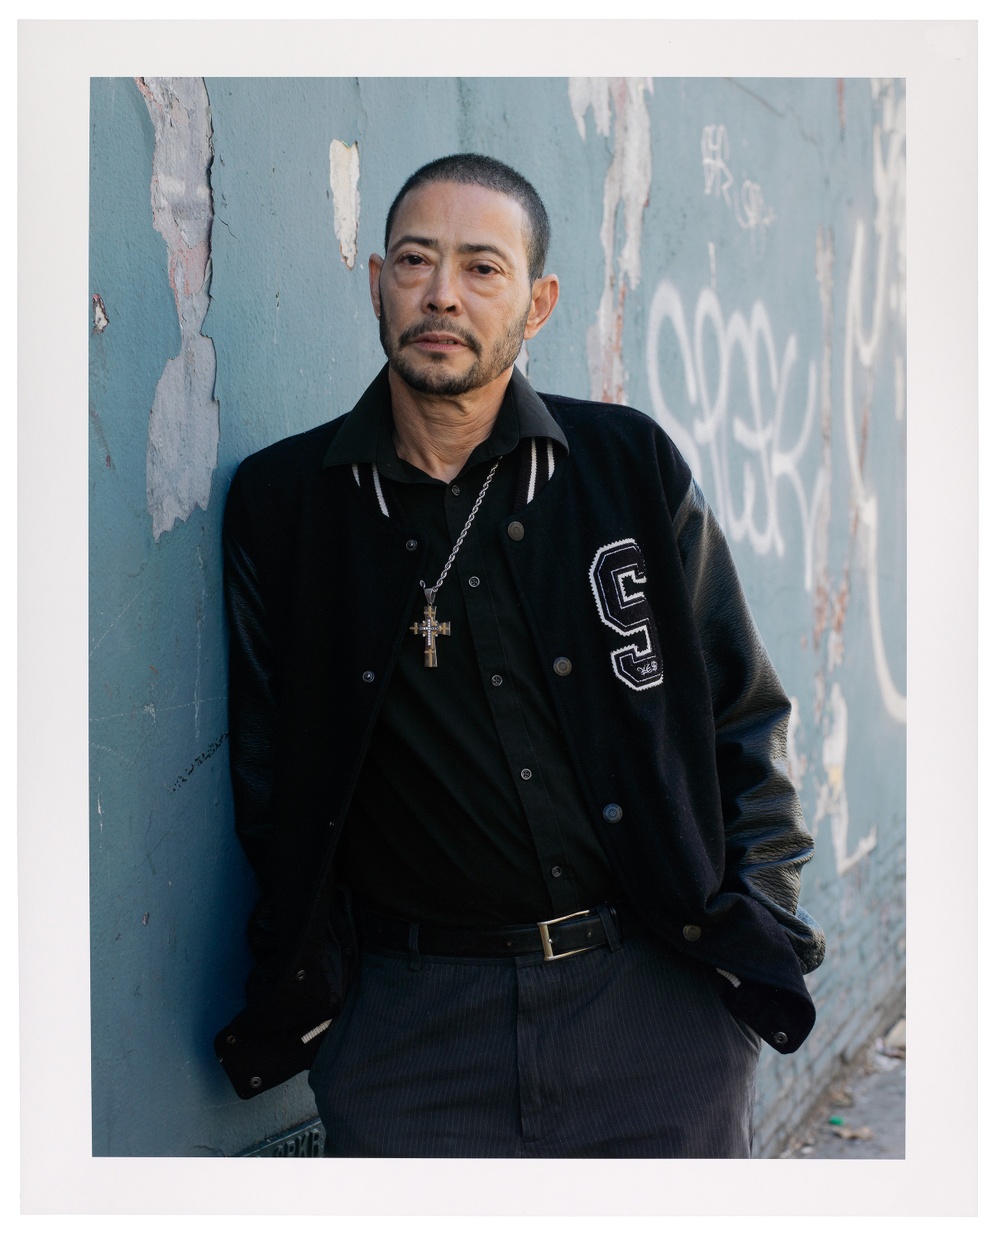 A photograph of an older, Asian person with short buzz cut hair in a black letterman jacket wearing a metal cross leaning against a blue, cement wall. 